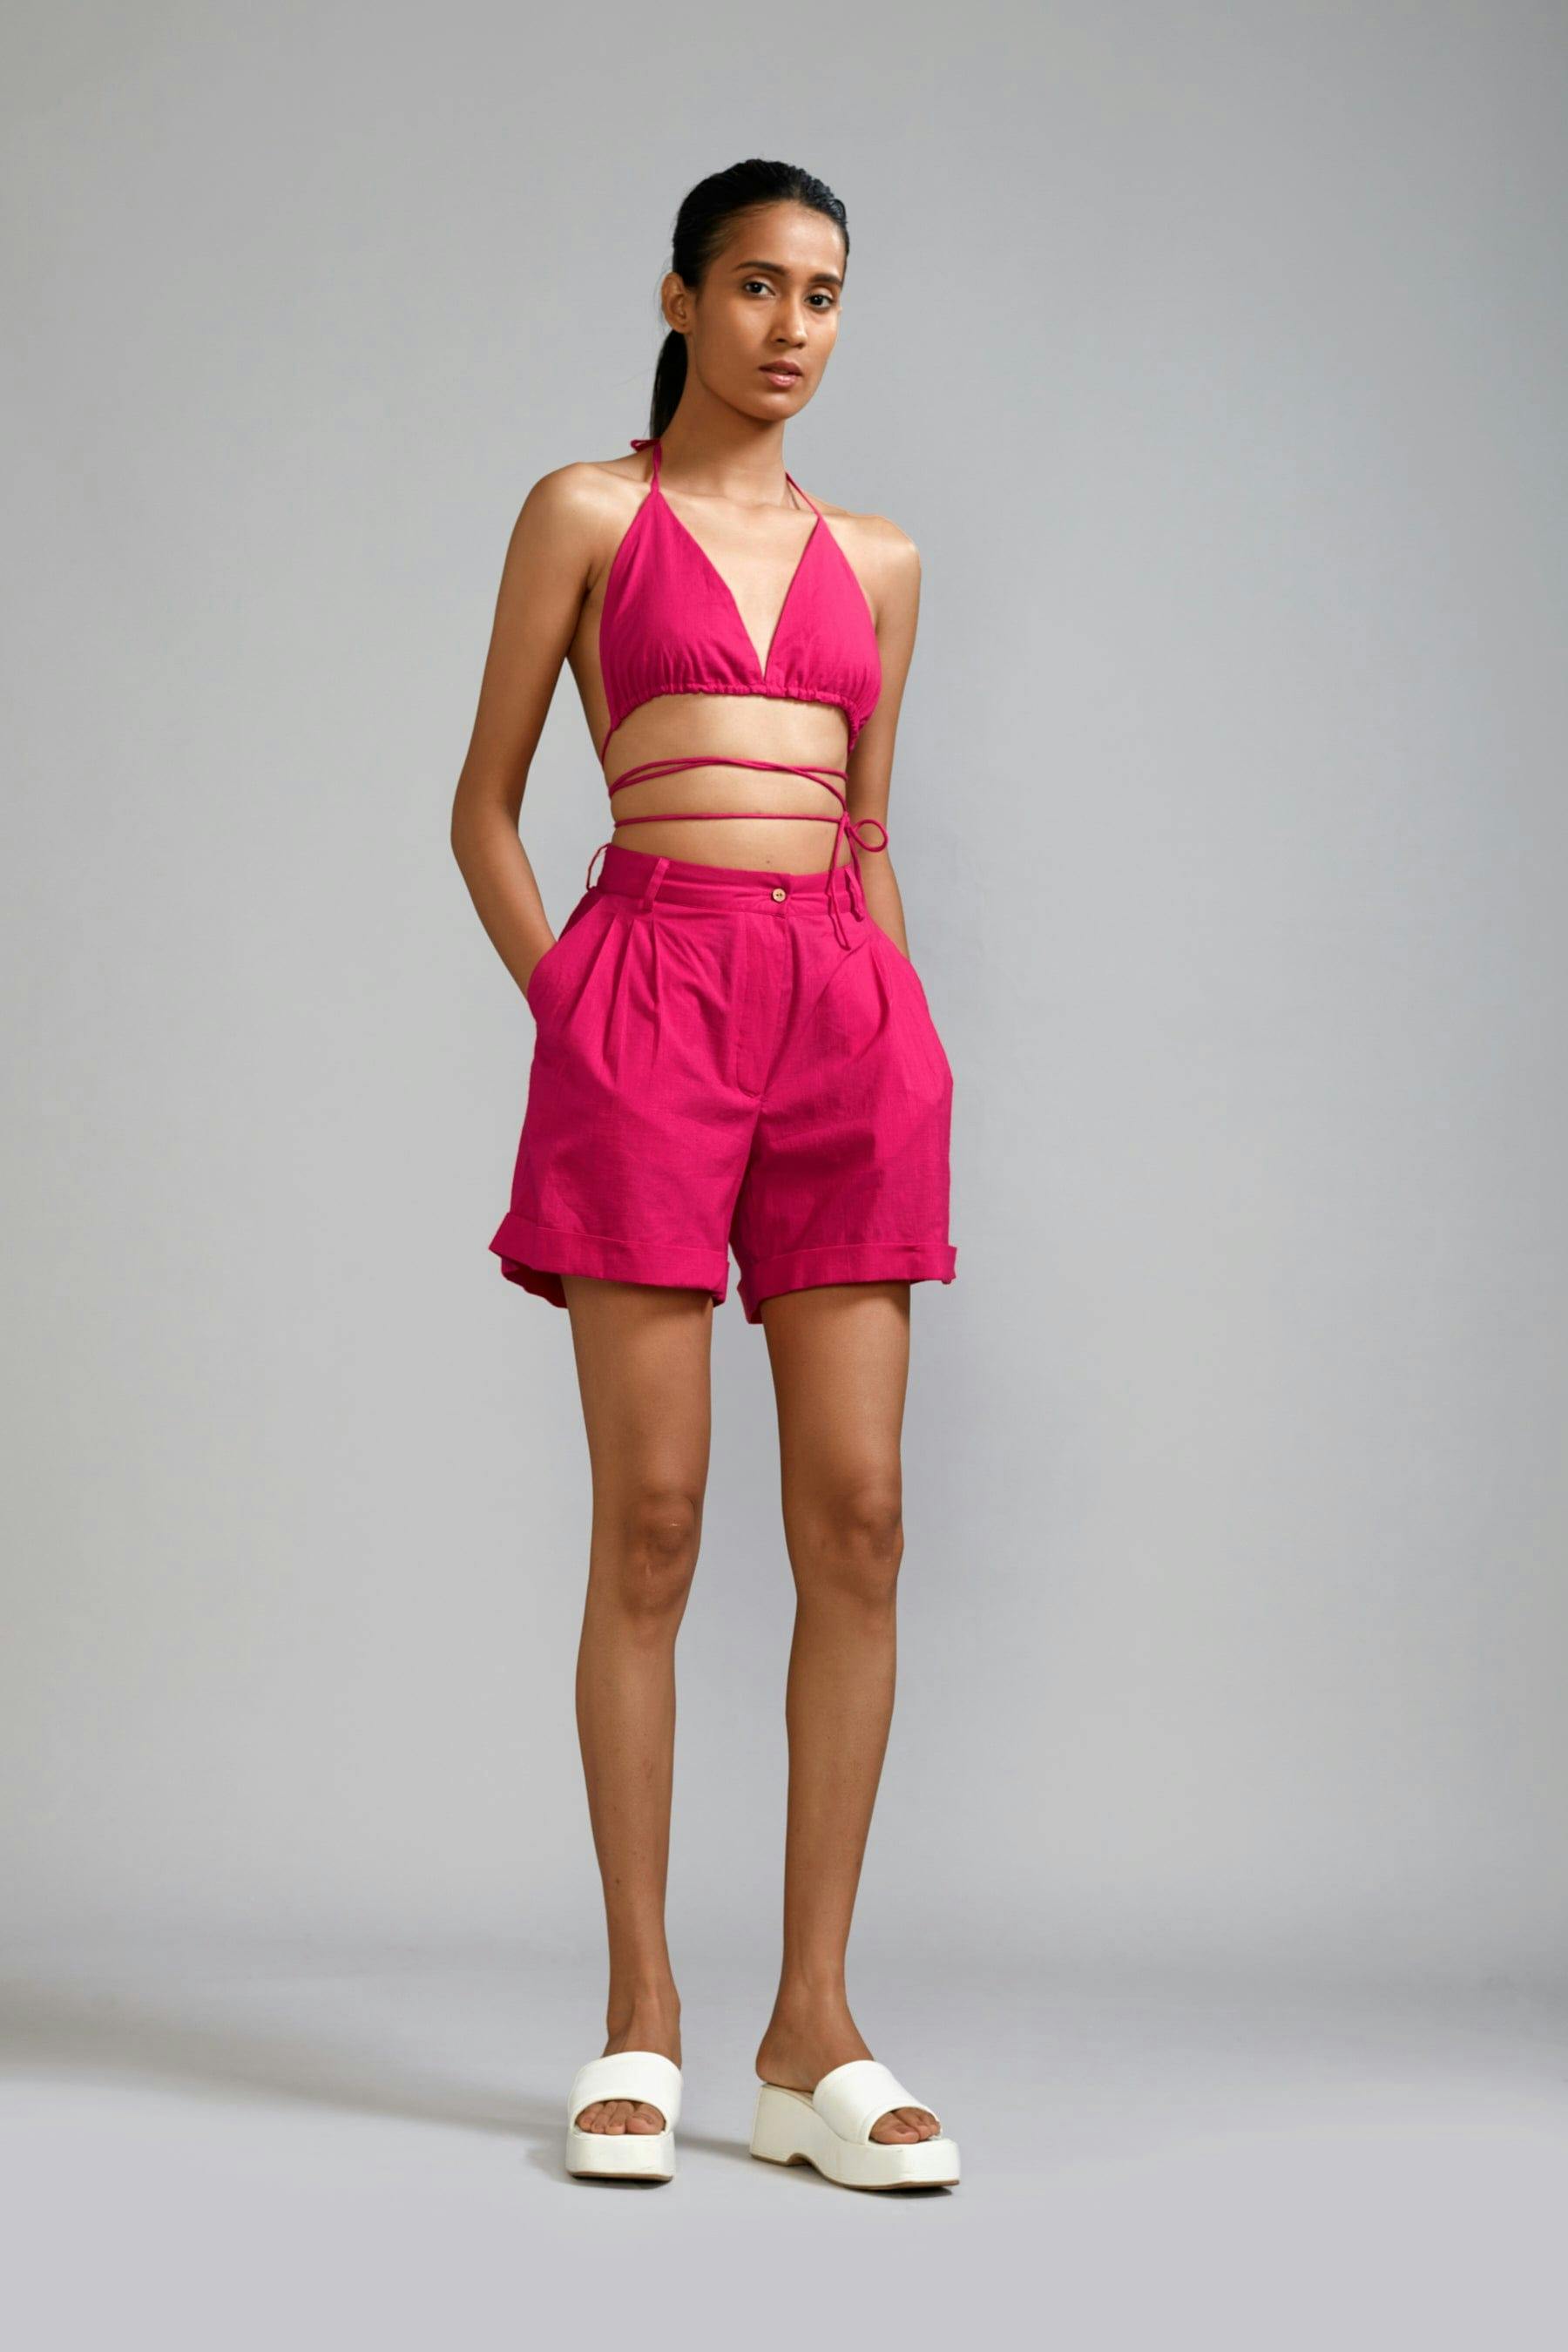 Pink Overlap Bralette & Shorts Set (2 PCS), a product by Style Mati